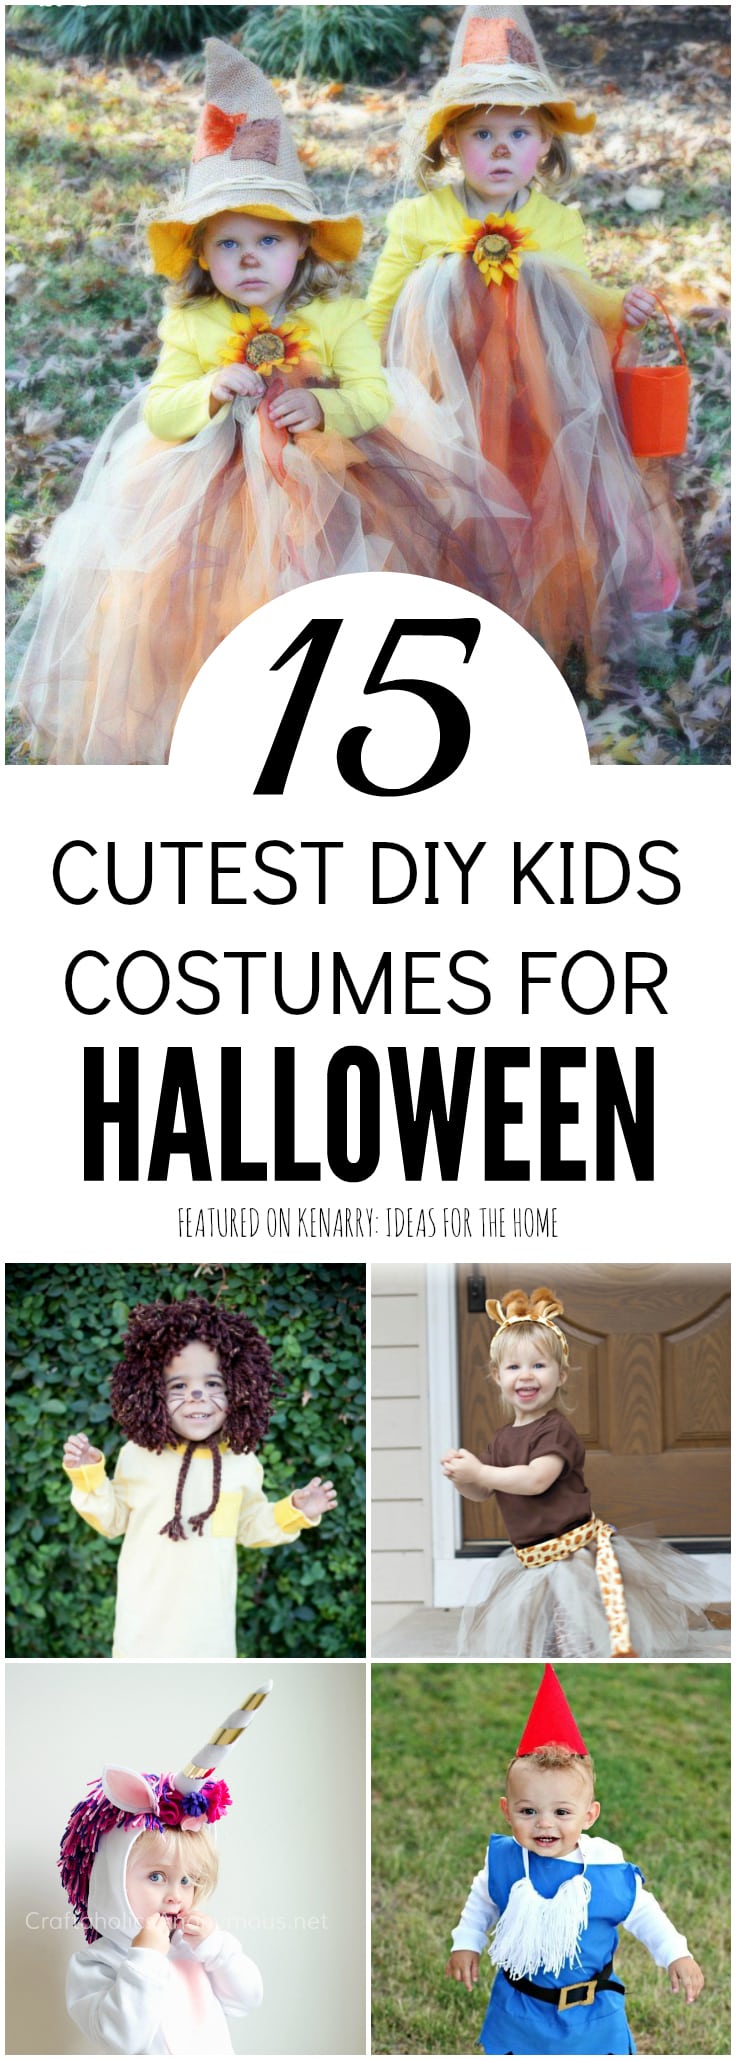 Halloween Costumes: The 15 Cutest DIY Ideas for Kids